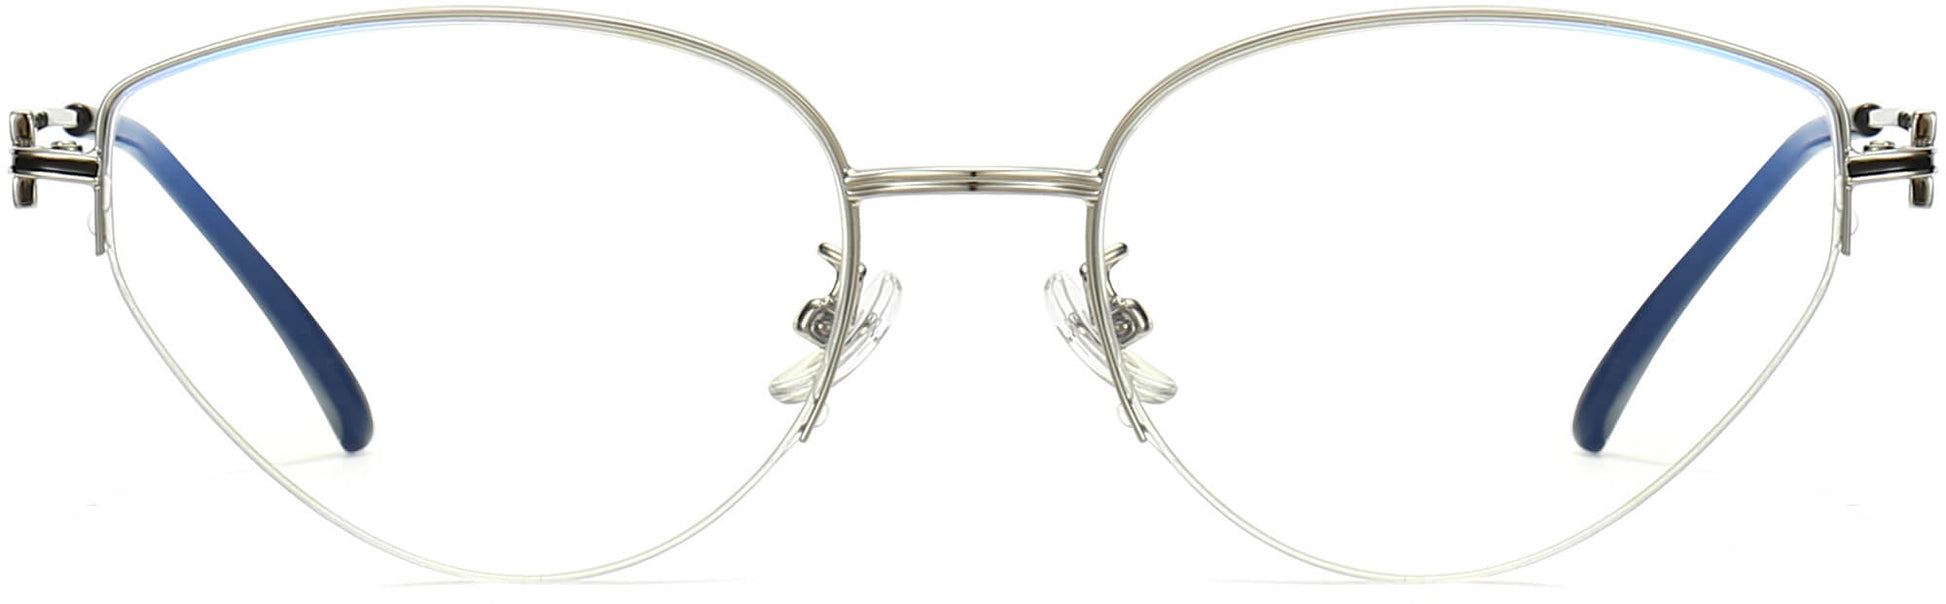 Blaire Cateye Silver Eyeglasses from ANRRI, front view